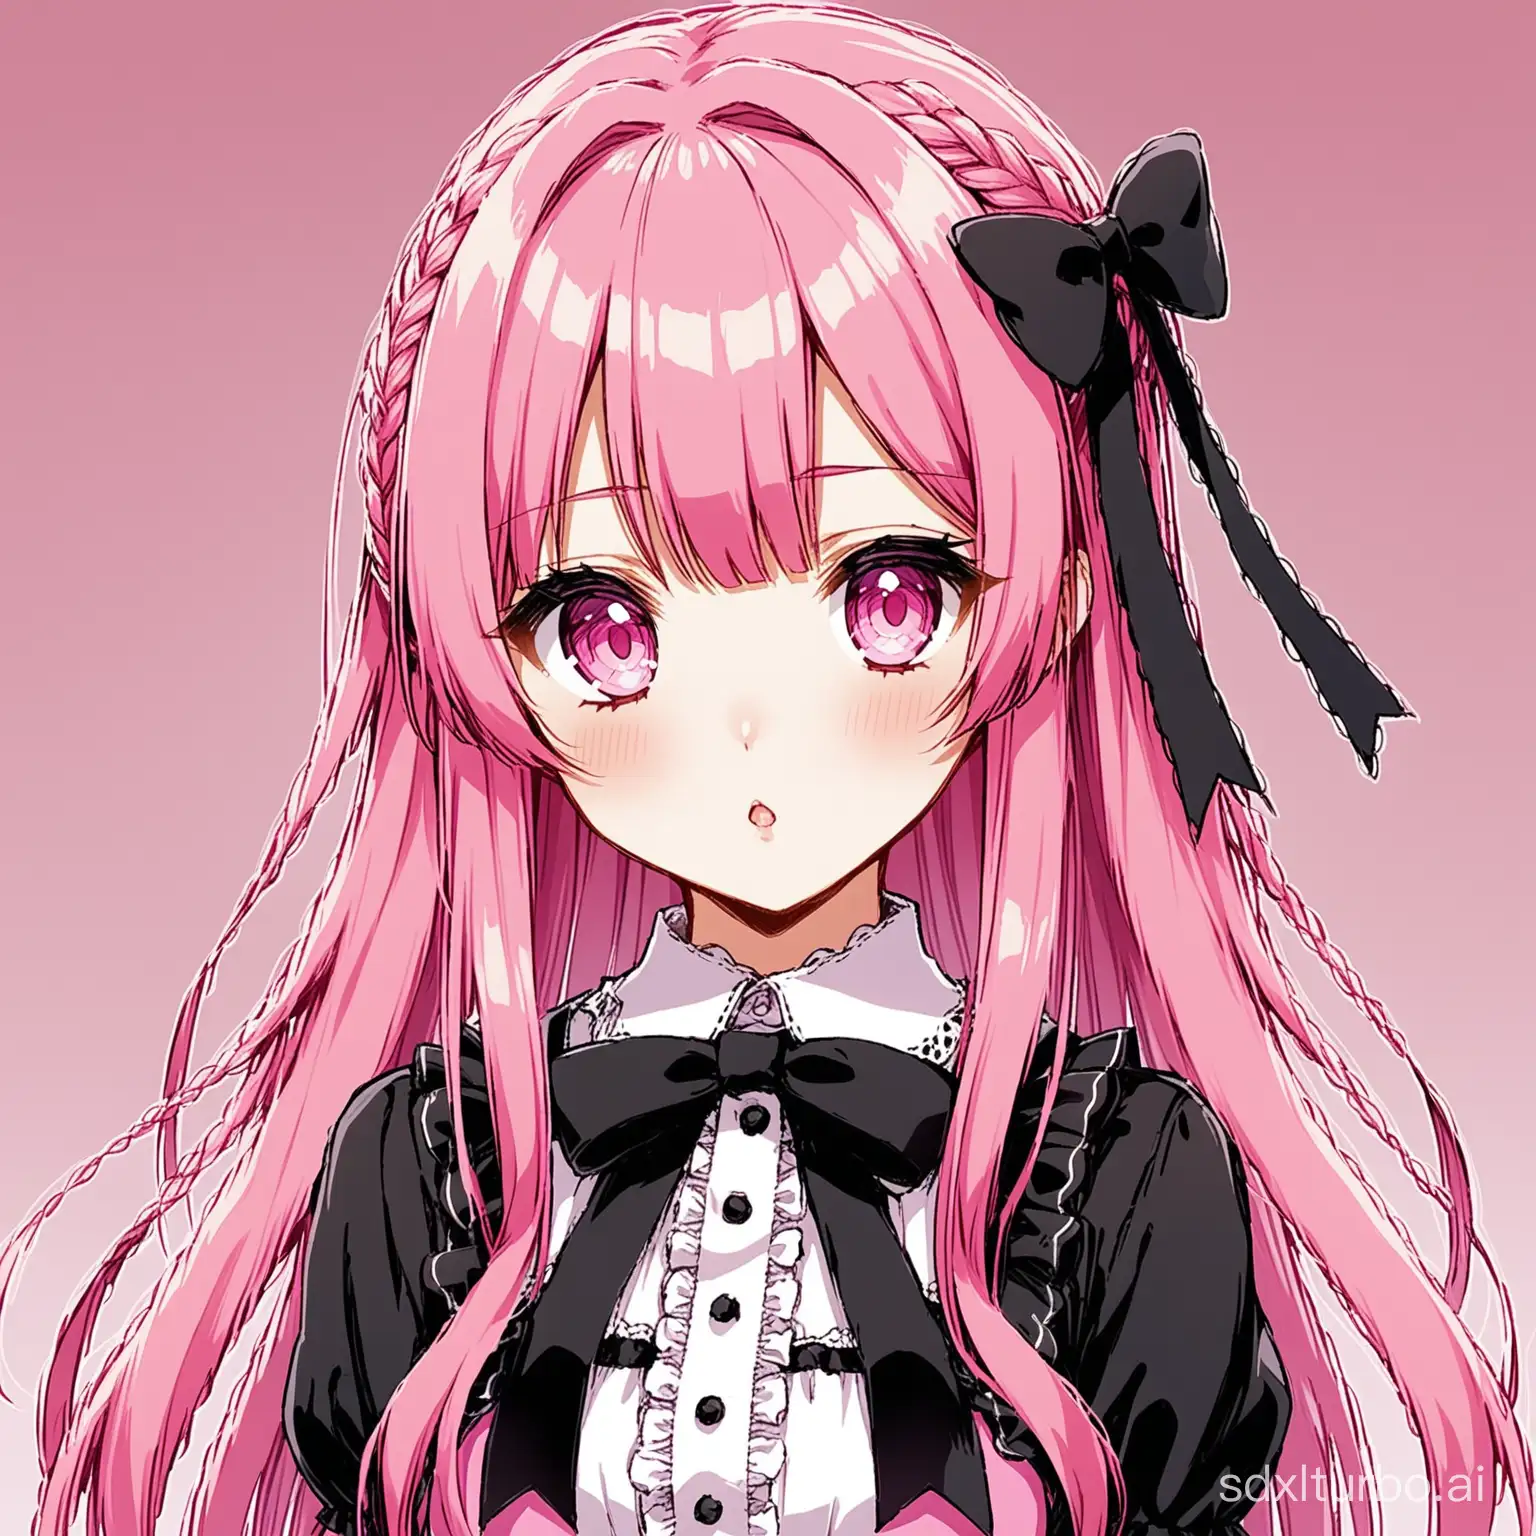 Jirai-Kei-Anime-Girl-with-Pink-Hair-Enigmatic-Character-in-Vibrant-Colors